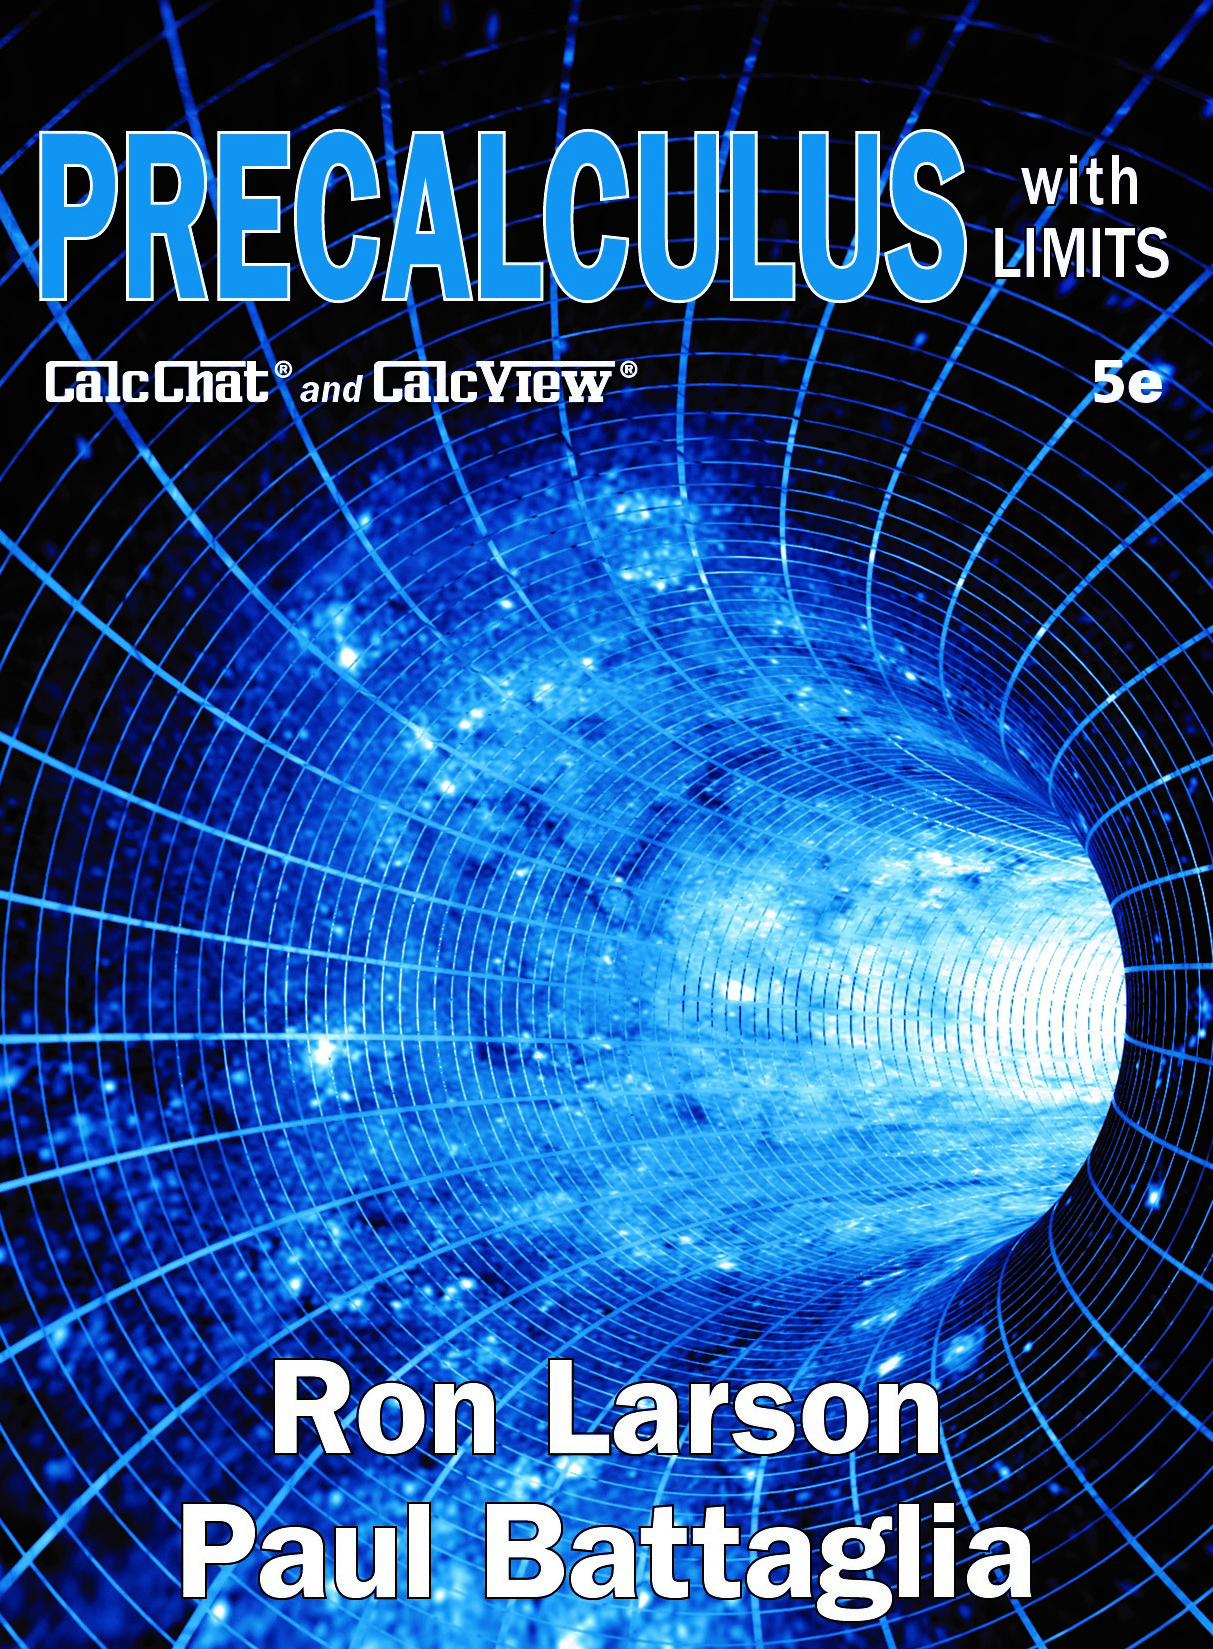 Precalculus with Limits cover